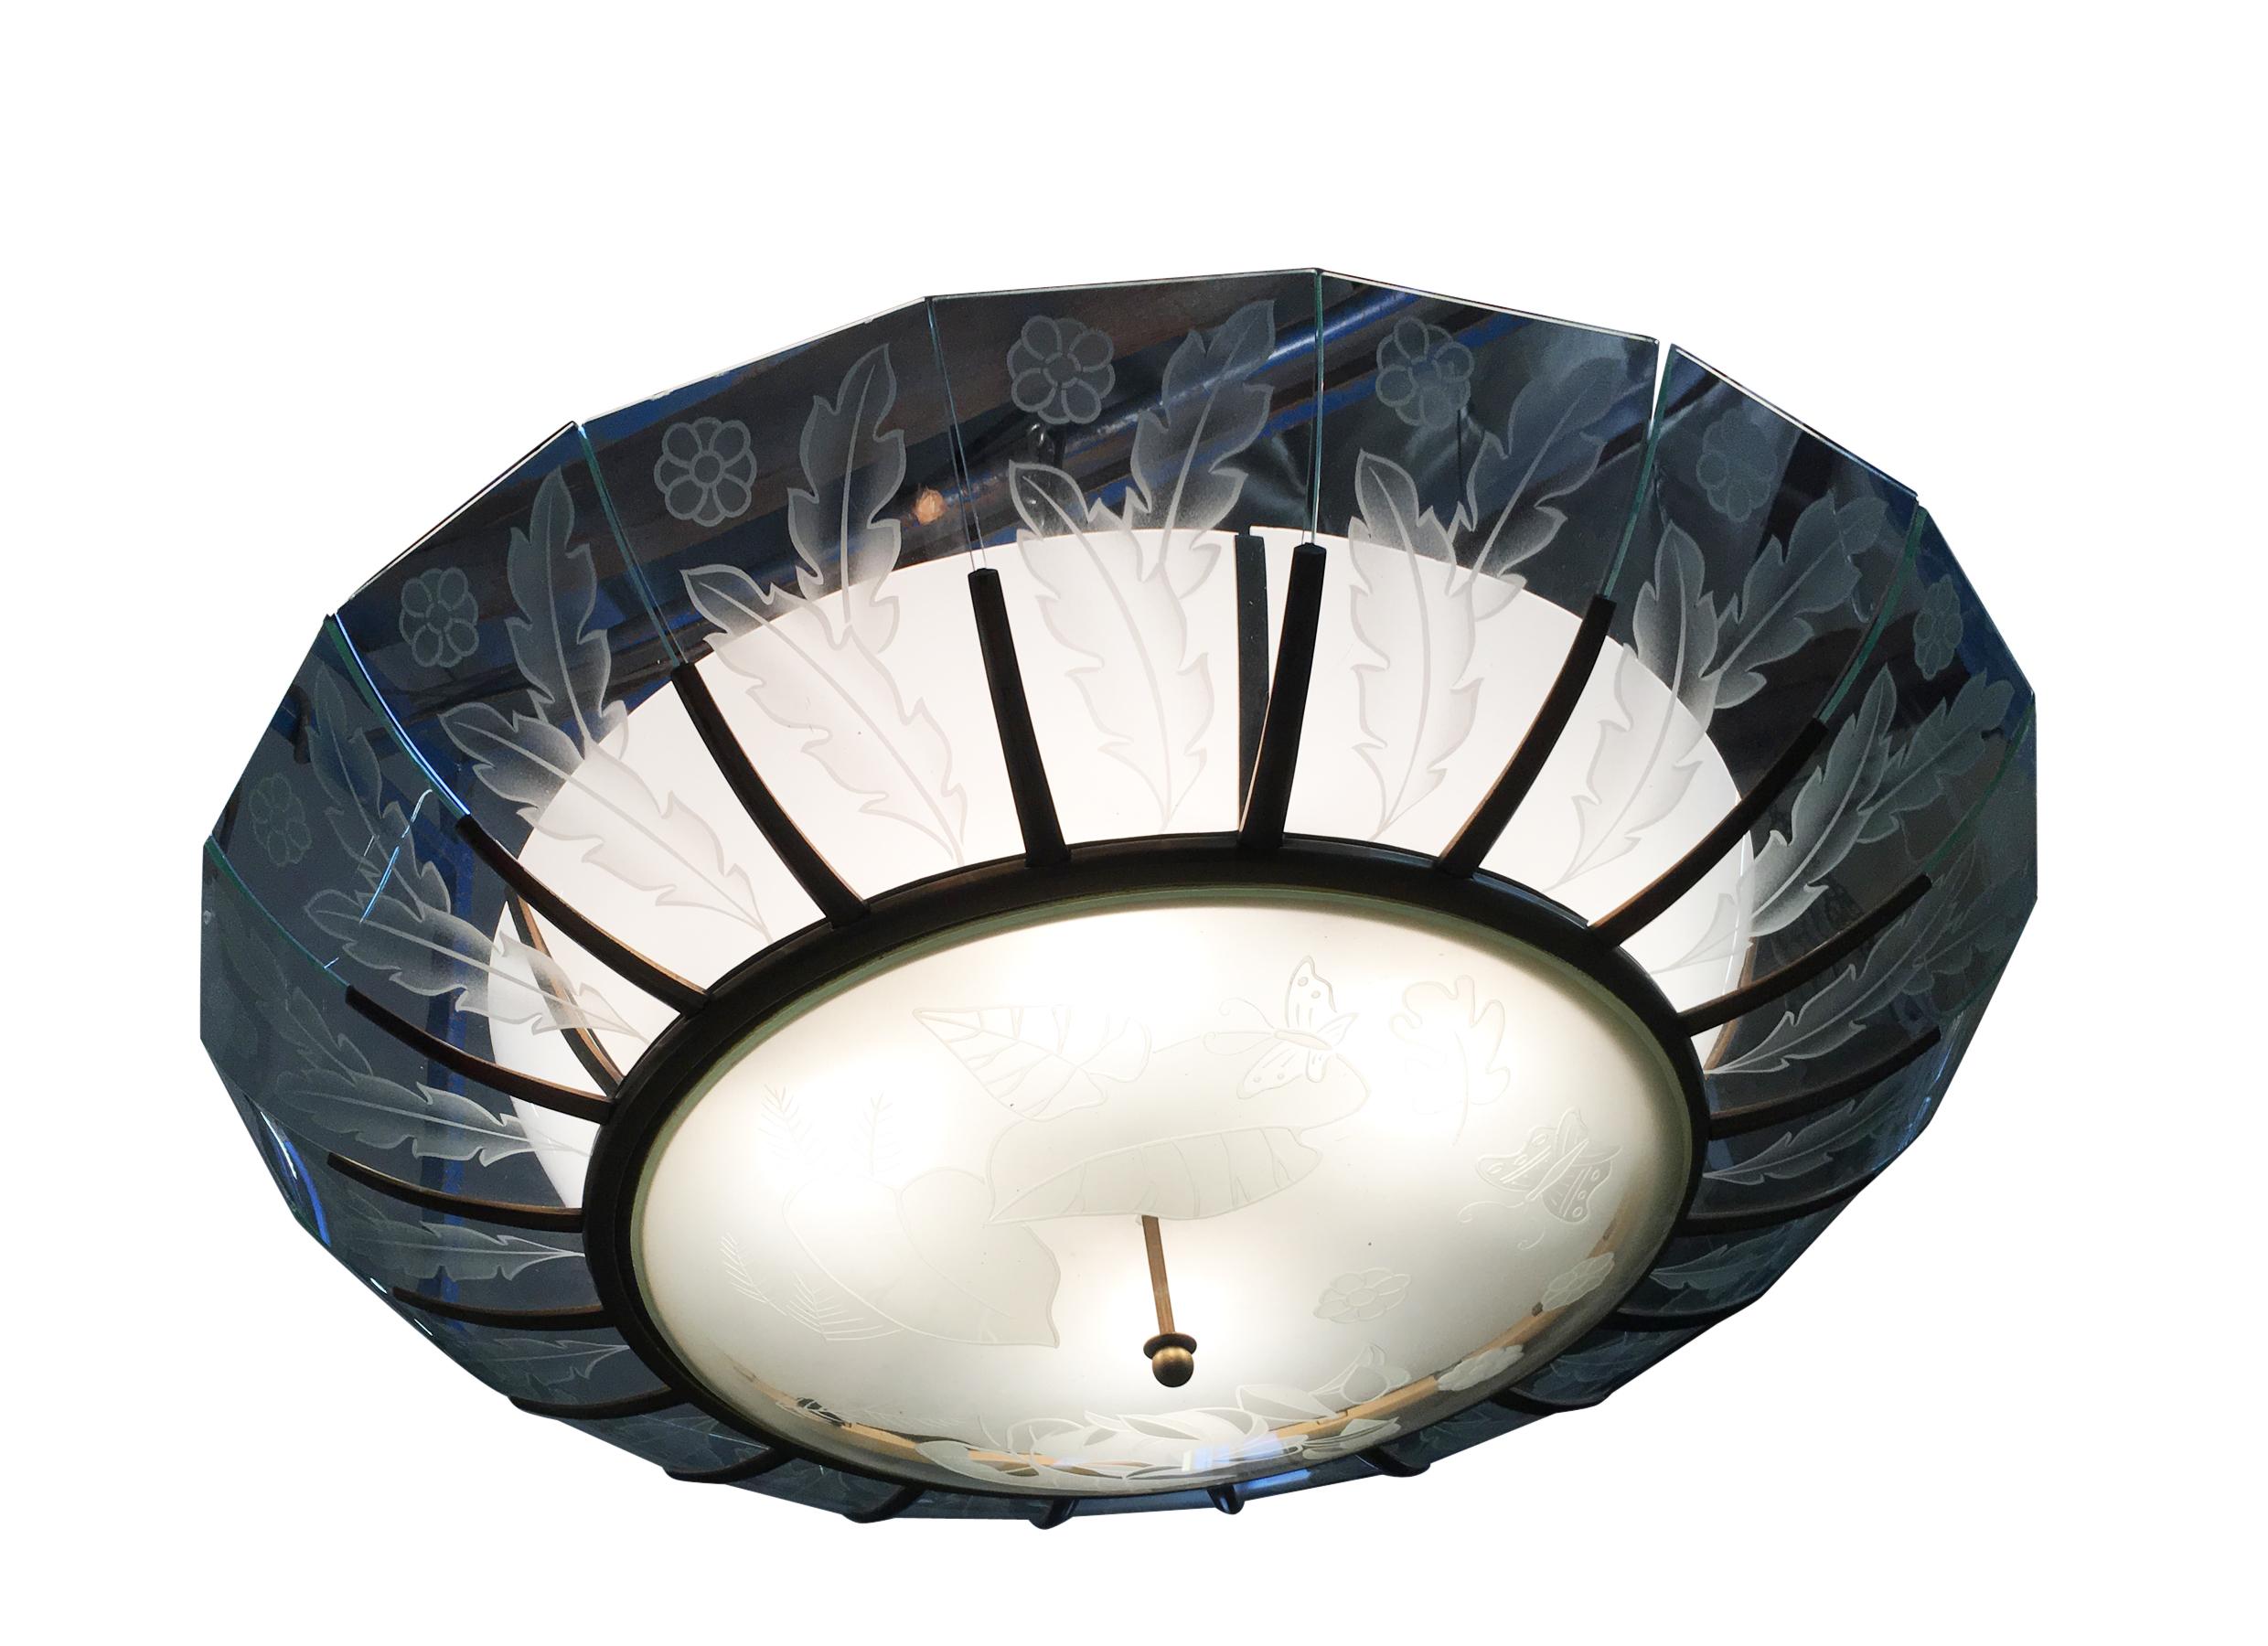 Unique custom made modernist bronze bowl chandelier made with a bronze frame and etched glass slats featuring a tropical floral motif and large etched glass dome bottom. This was purchased from the Art Deco Bullocks Wilshire.
We have four in